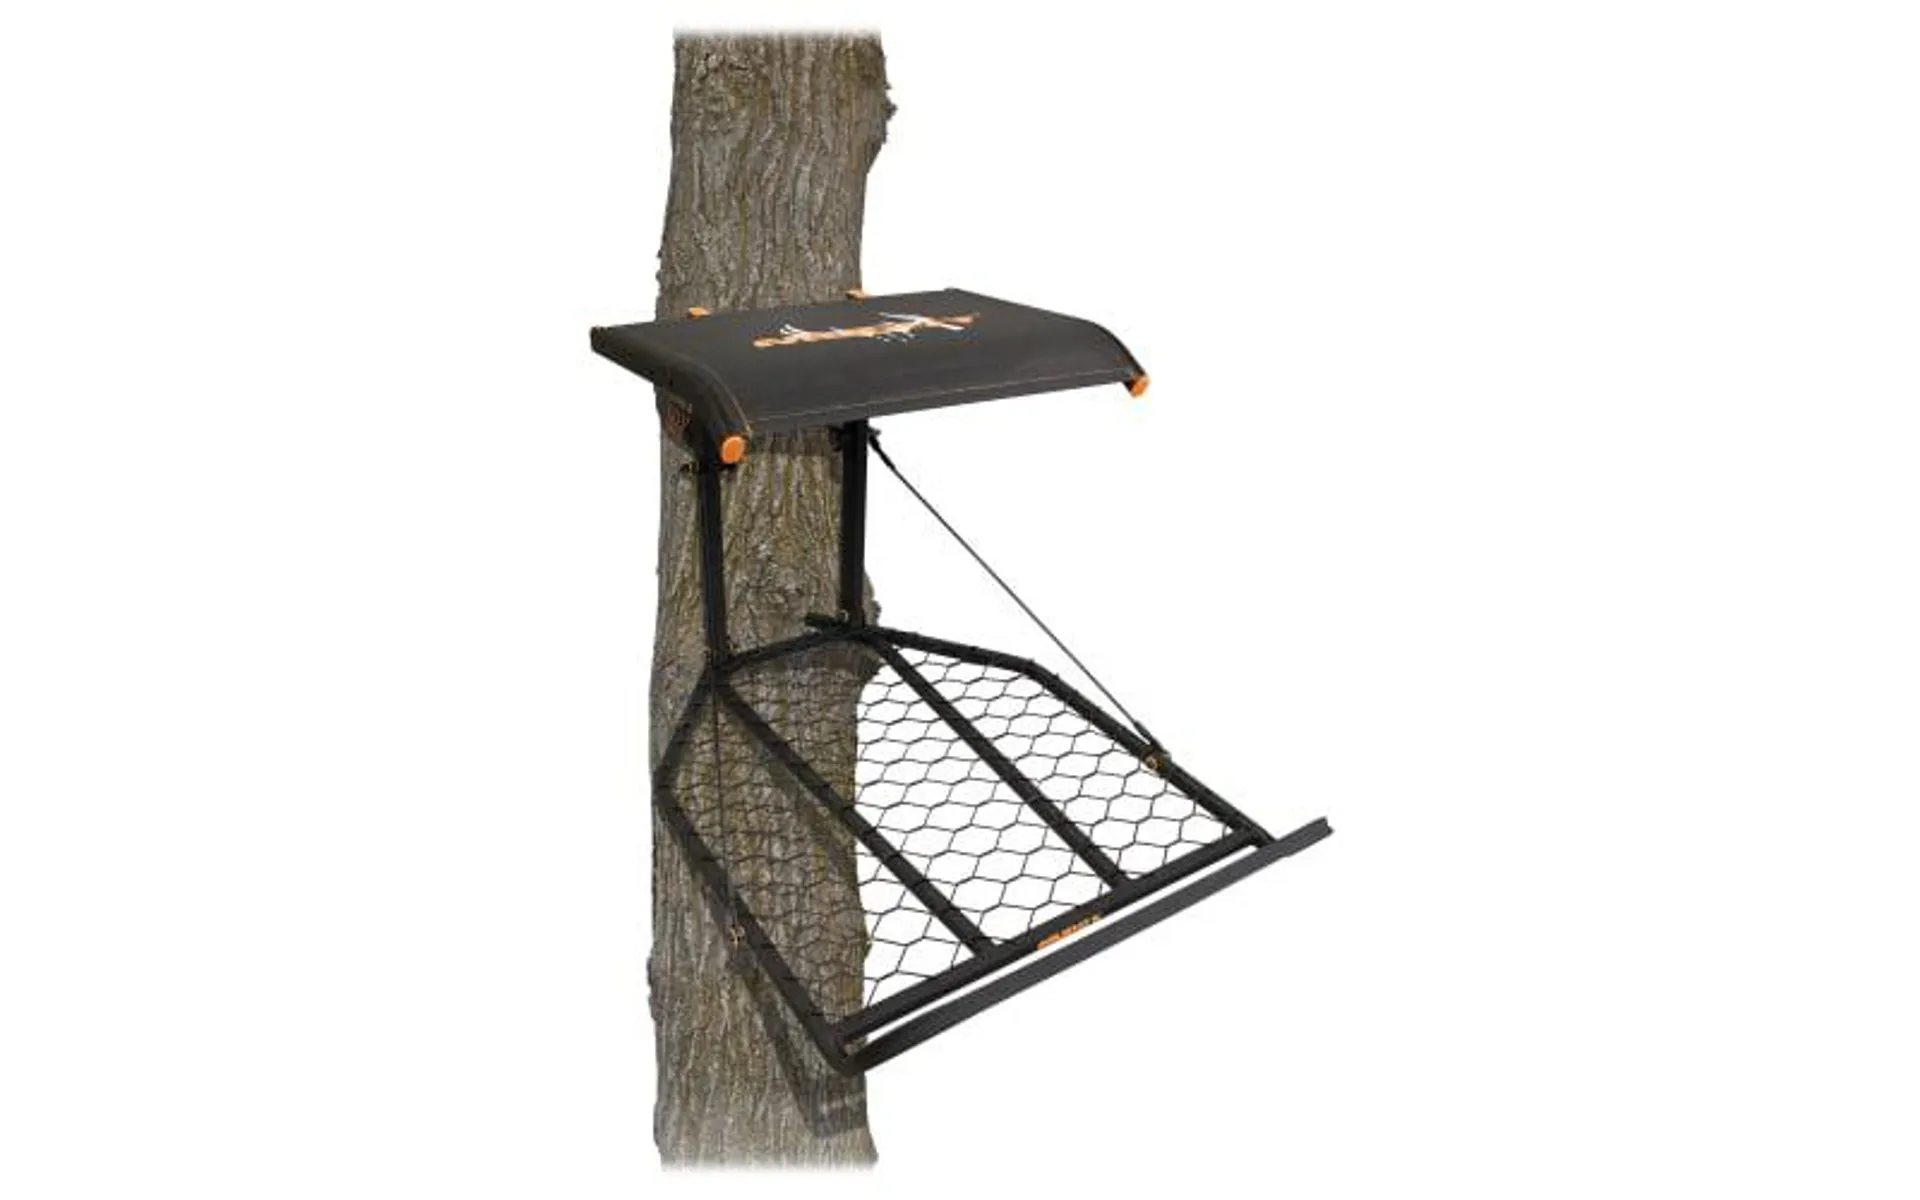 Muddy The Boss XL Fixed Position Treestand